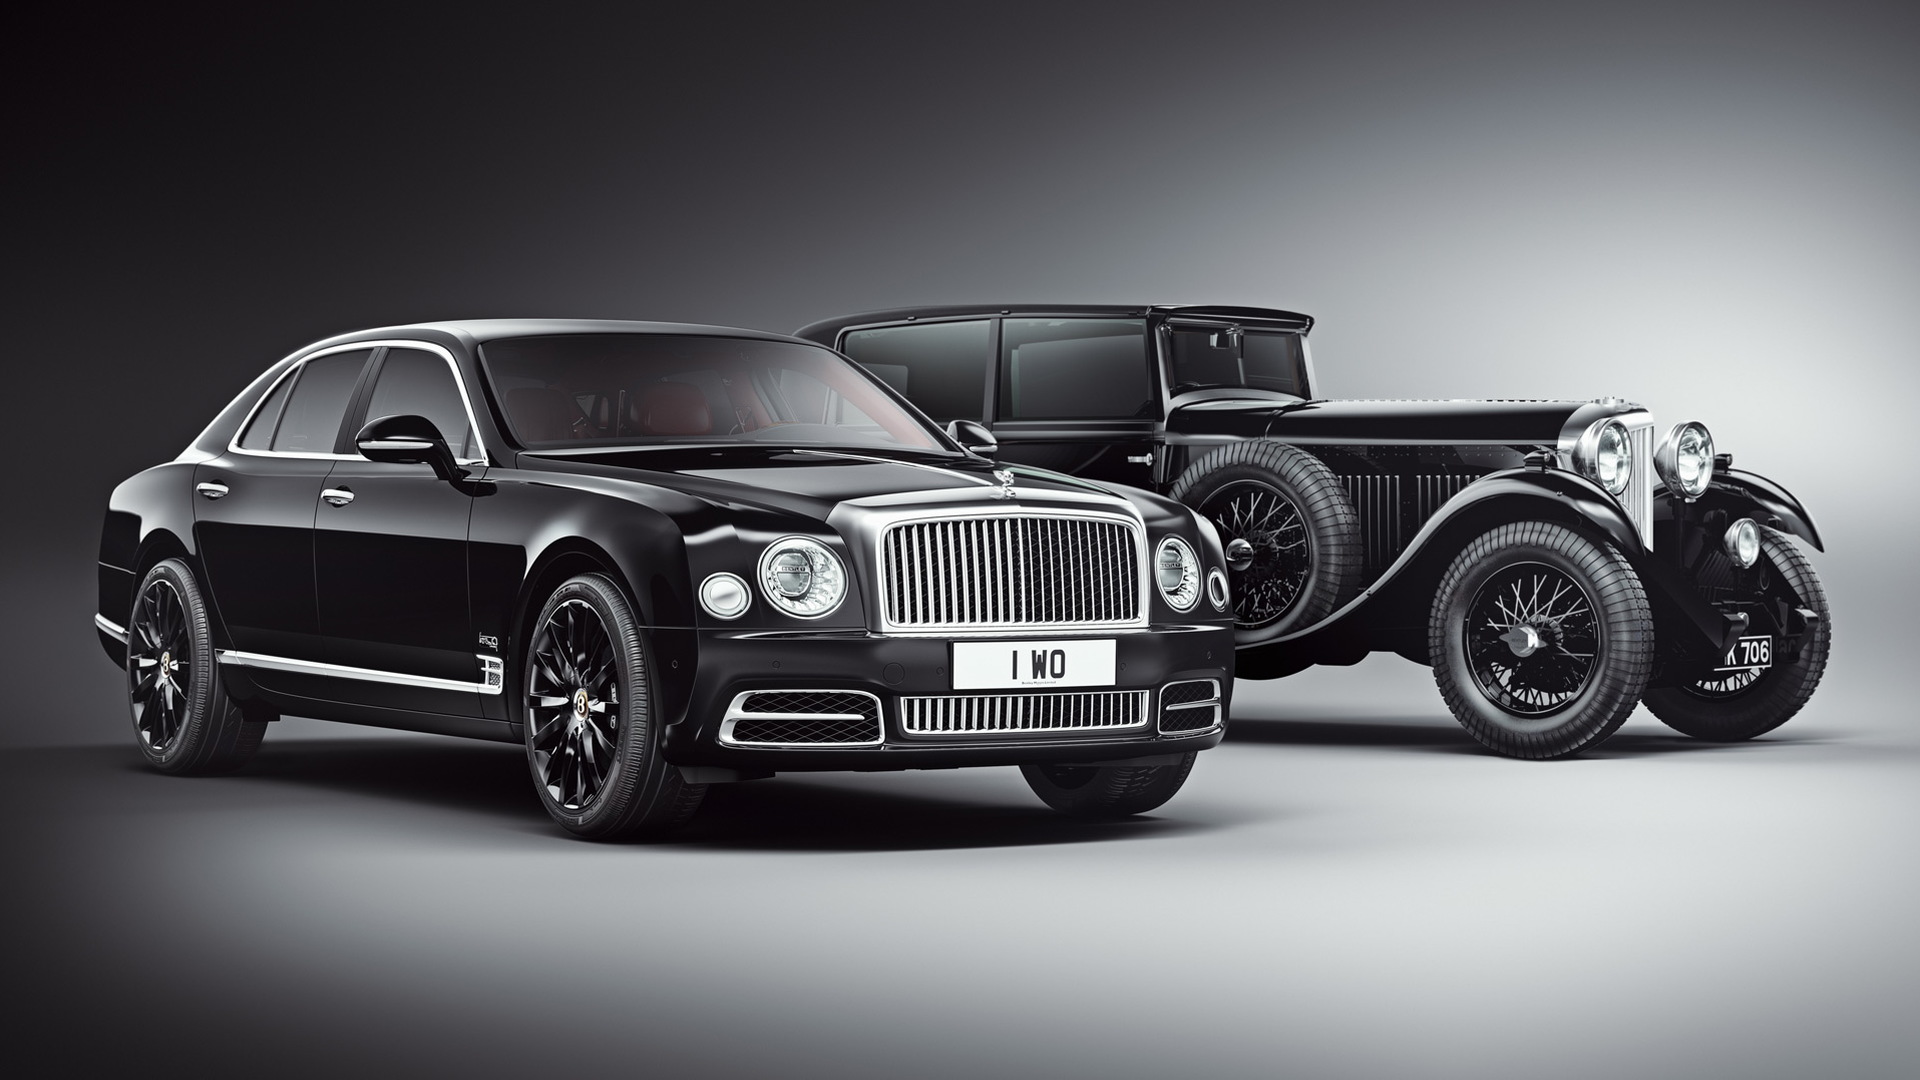 2019 Bentley Mulsanne W.O. Edition by Mulliner and 1930 Bentley 8 Litre